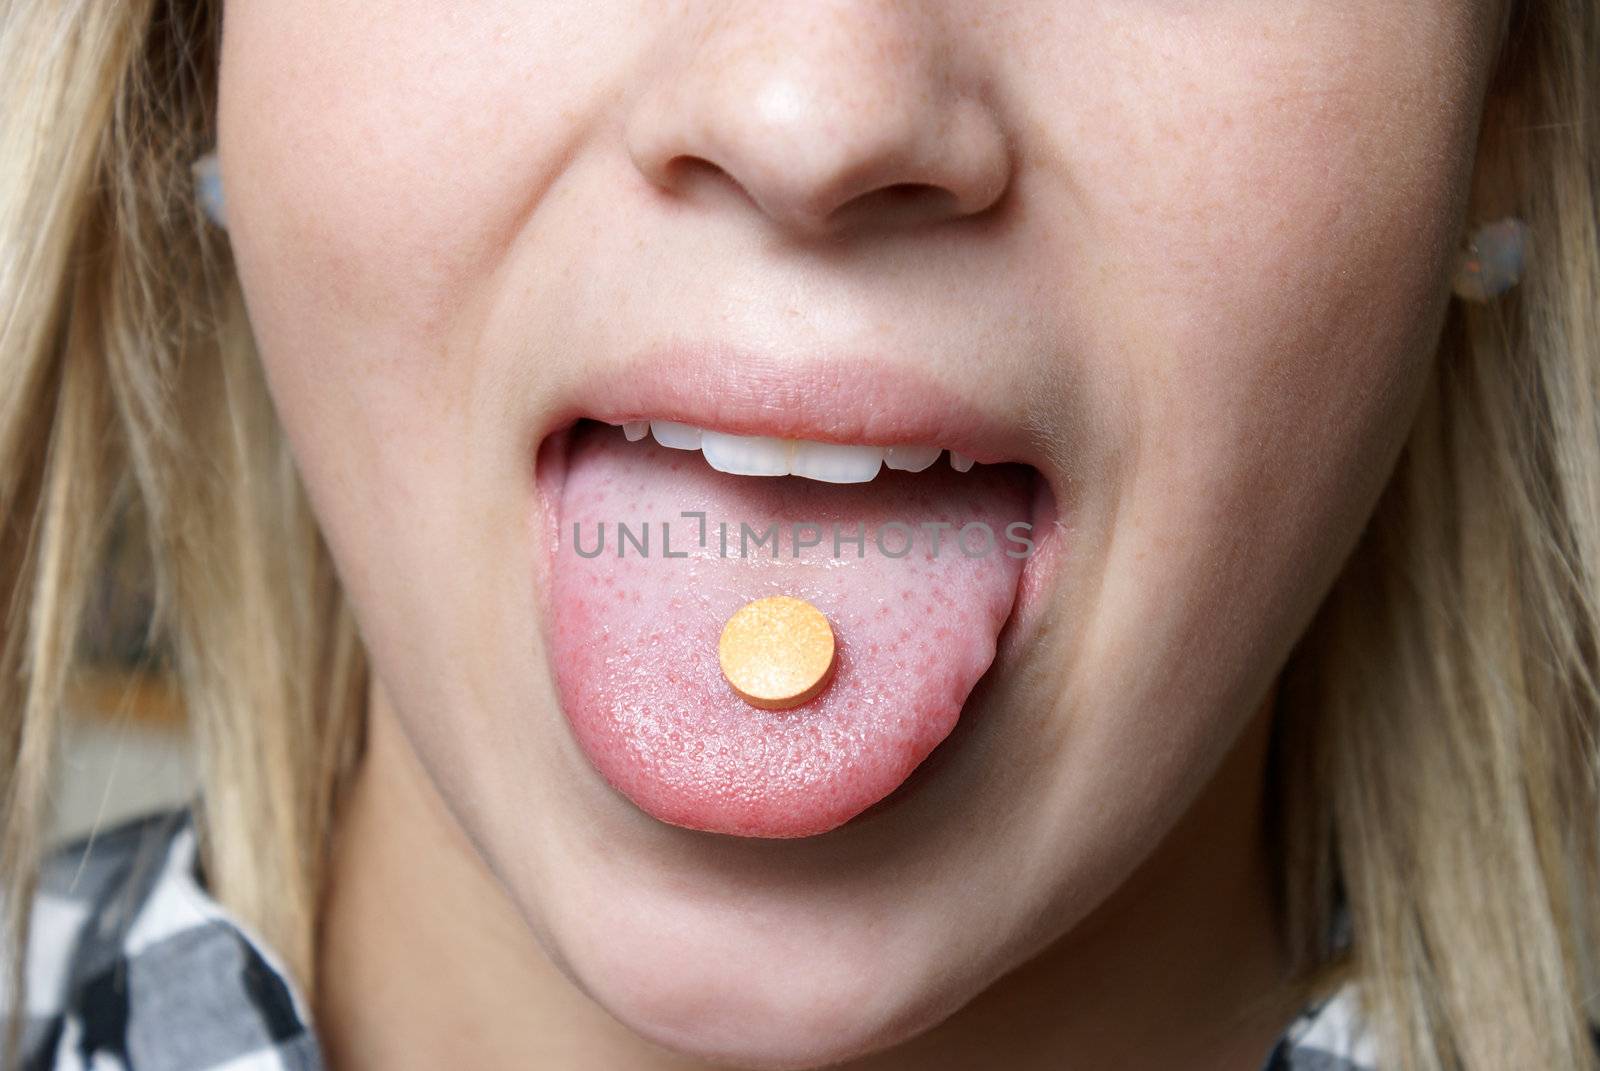 A young girl takes a vitamin c chewable tablet for supplementing her health.